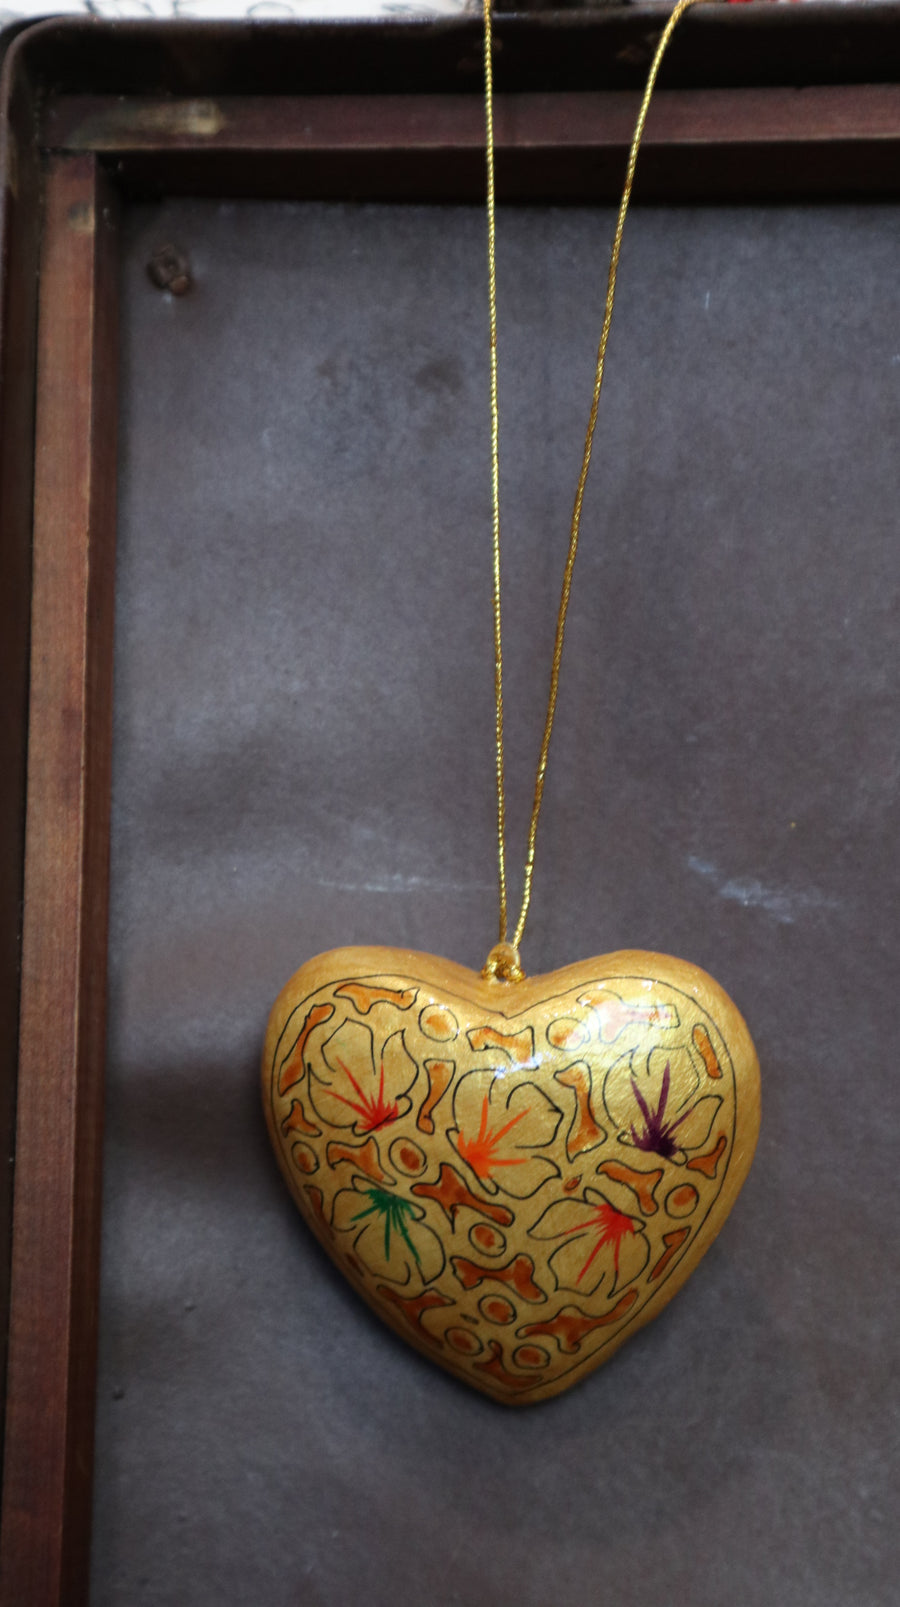 Fair Trade Ethical Christmas Decoration Hanging Heart Gold Leaf